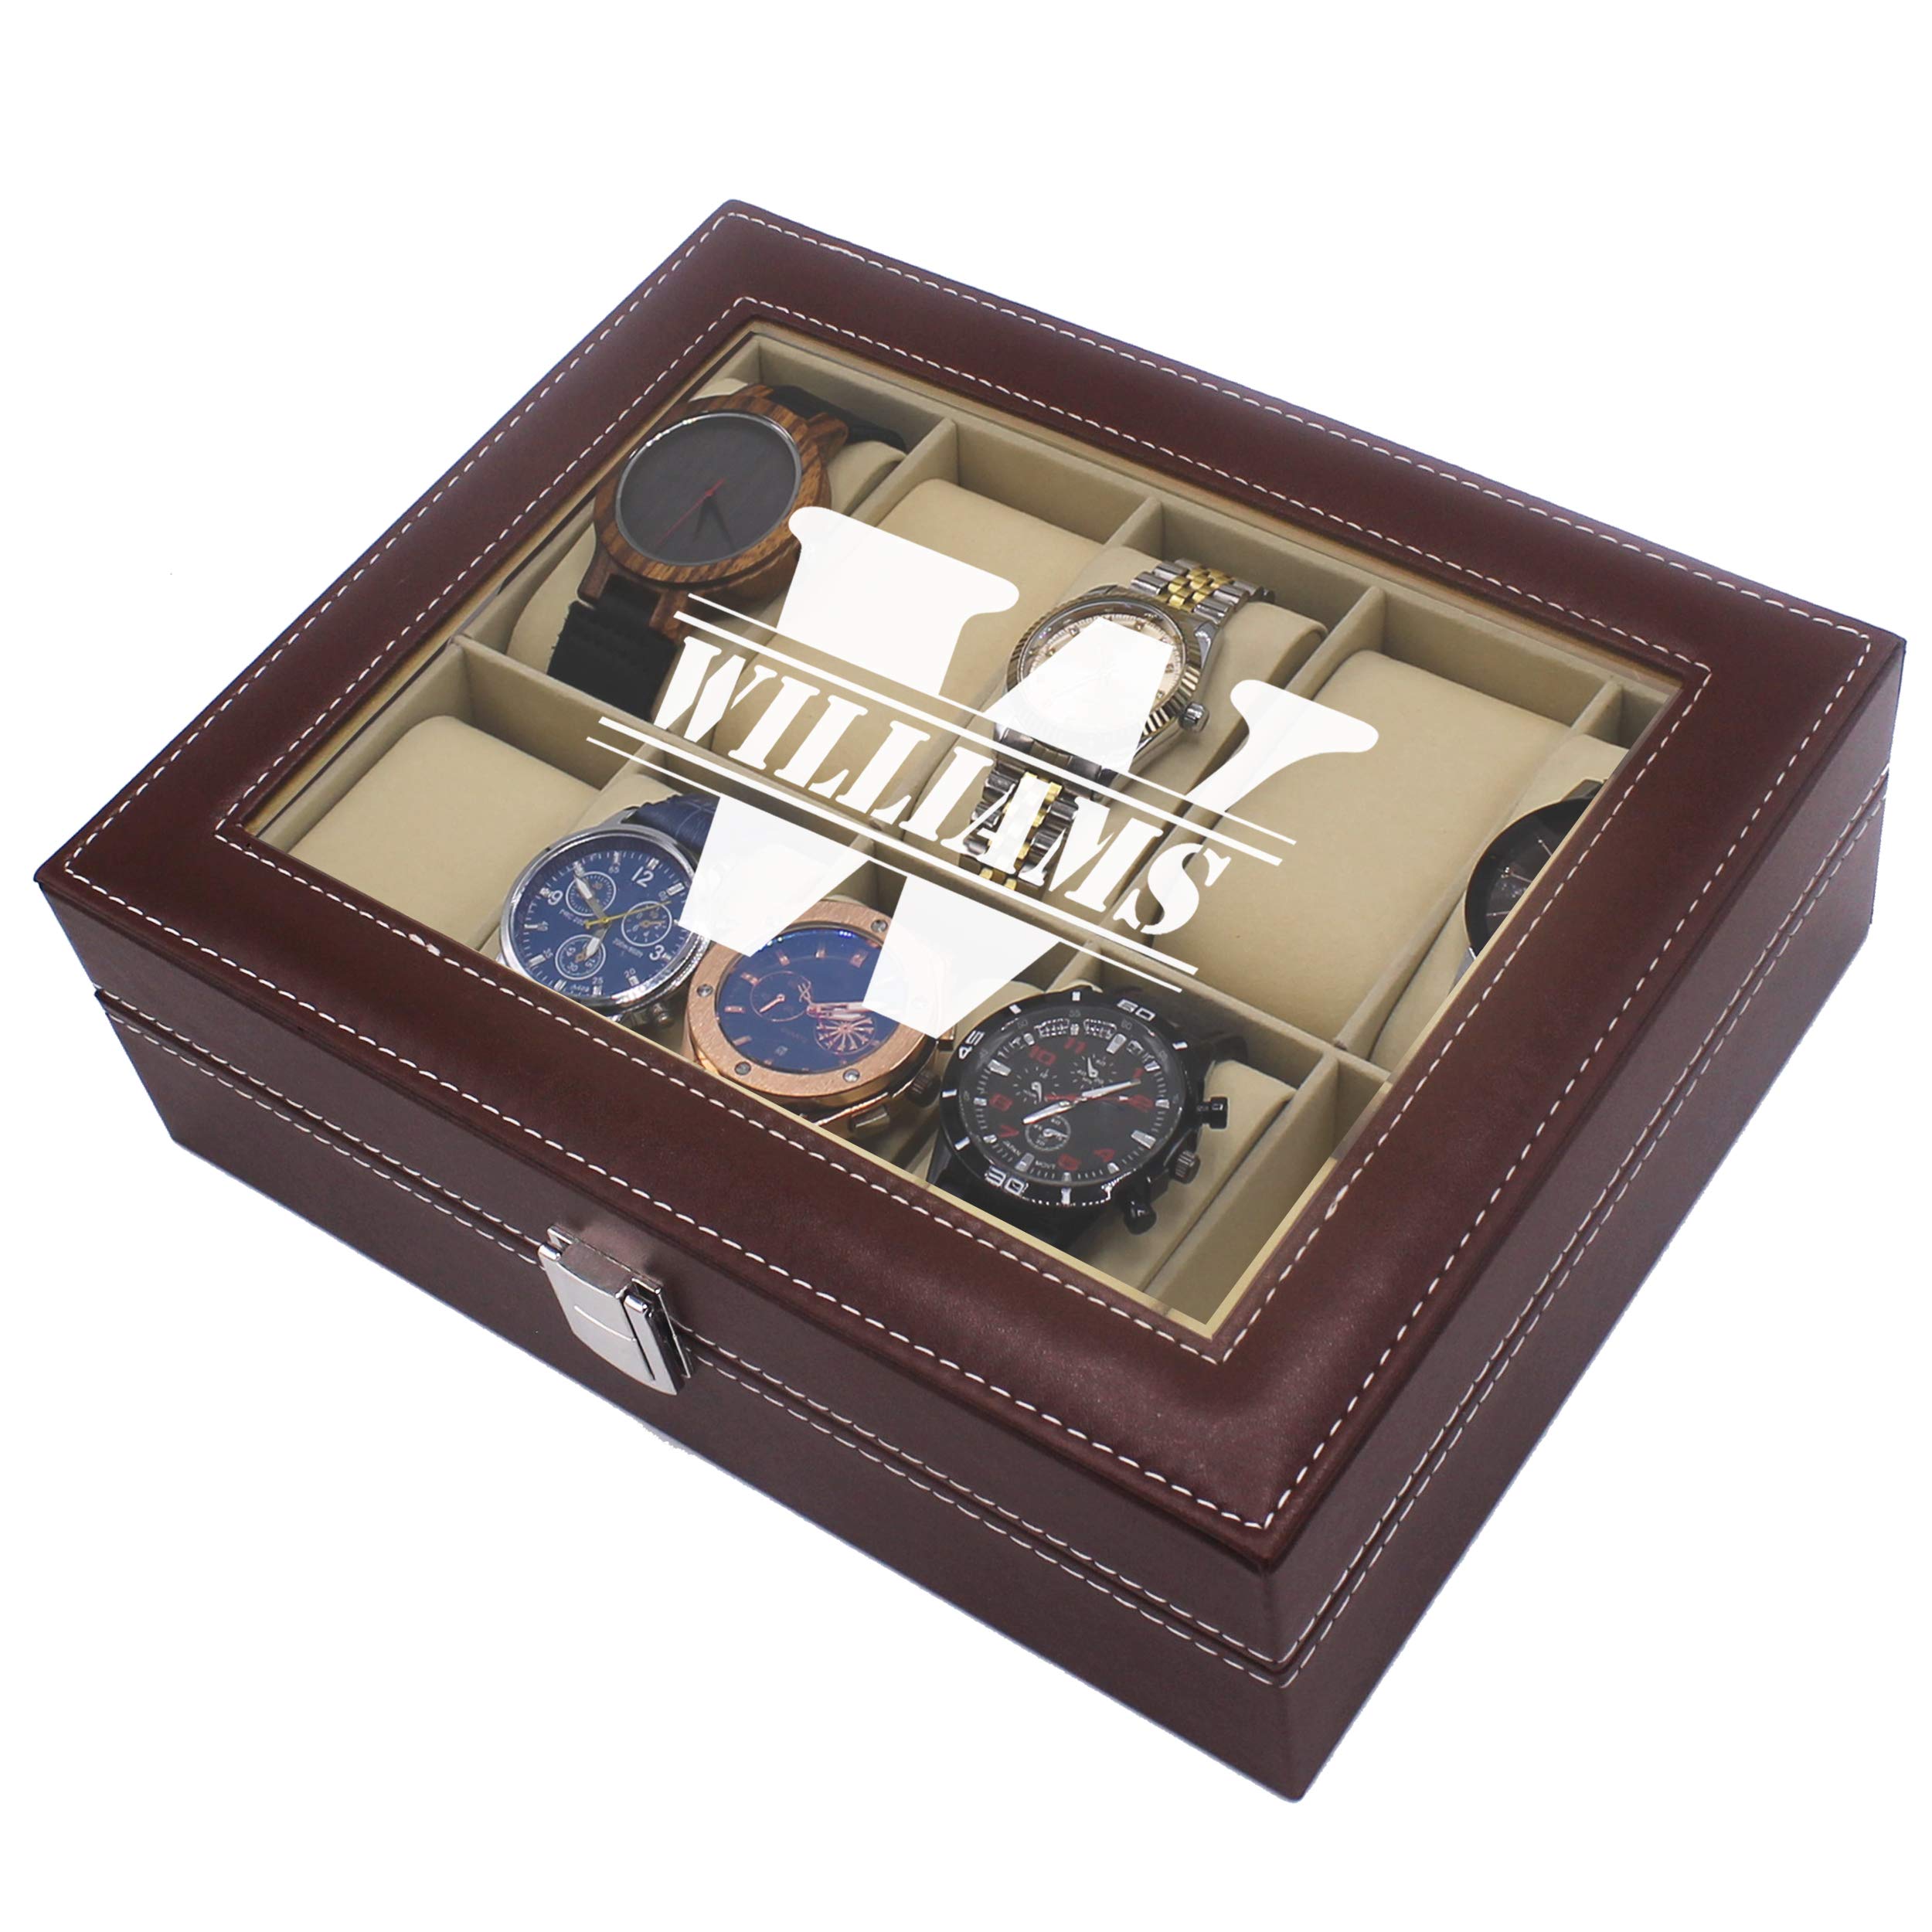 My Personal Memories, Custom Personalized Watch Storage Box Case - Name Initial - Groomsmen Fathers Day Gift - Engraved (Brown)